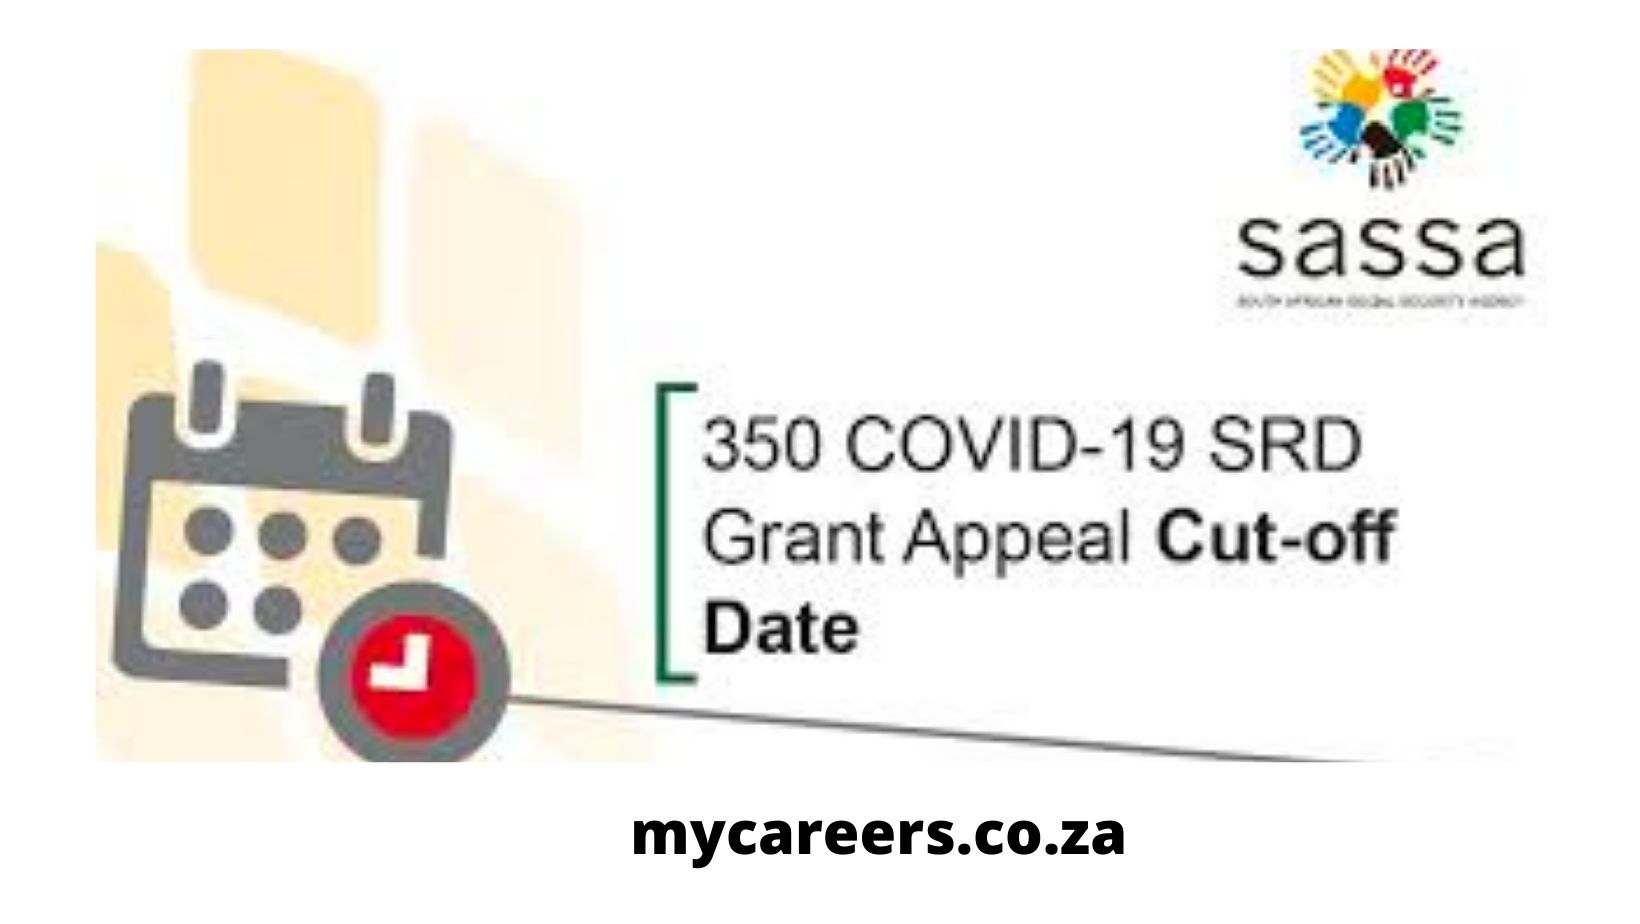 HOW DO I EXERCISE MY RIGHT TO APPEAL THE COVID-19 SRD R350 GRANT?